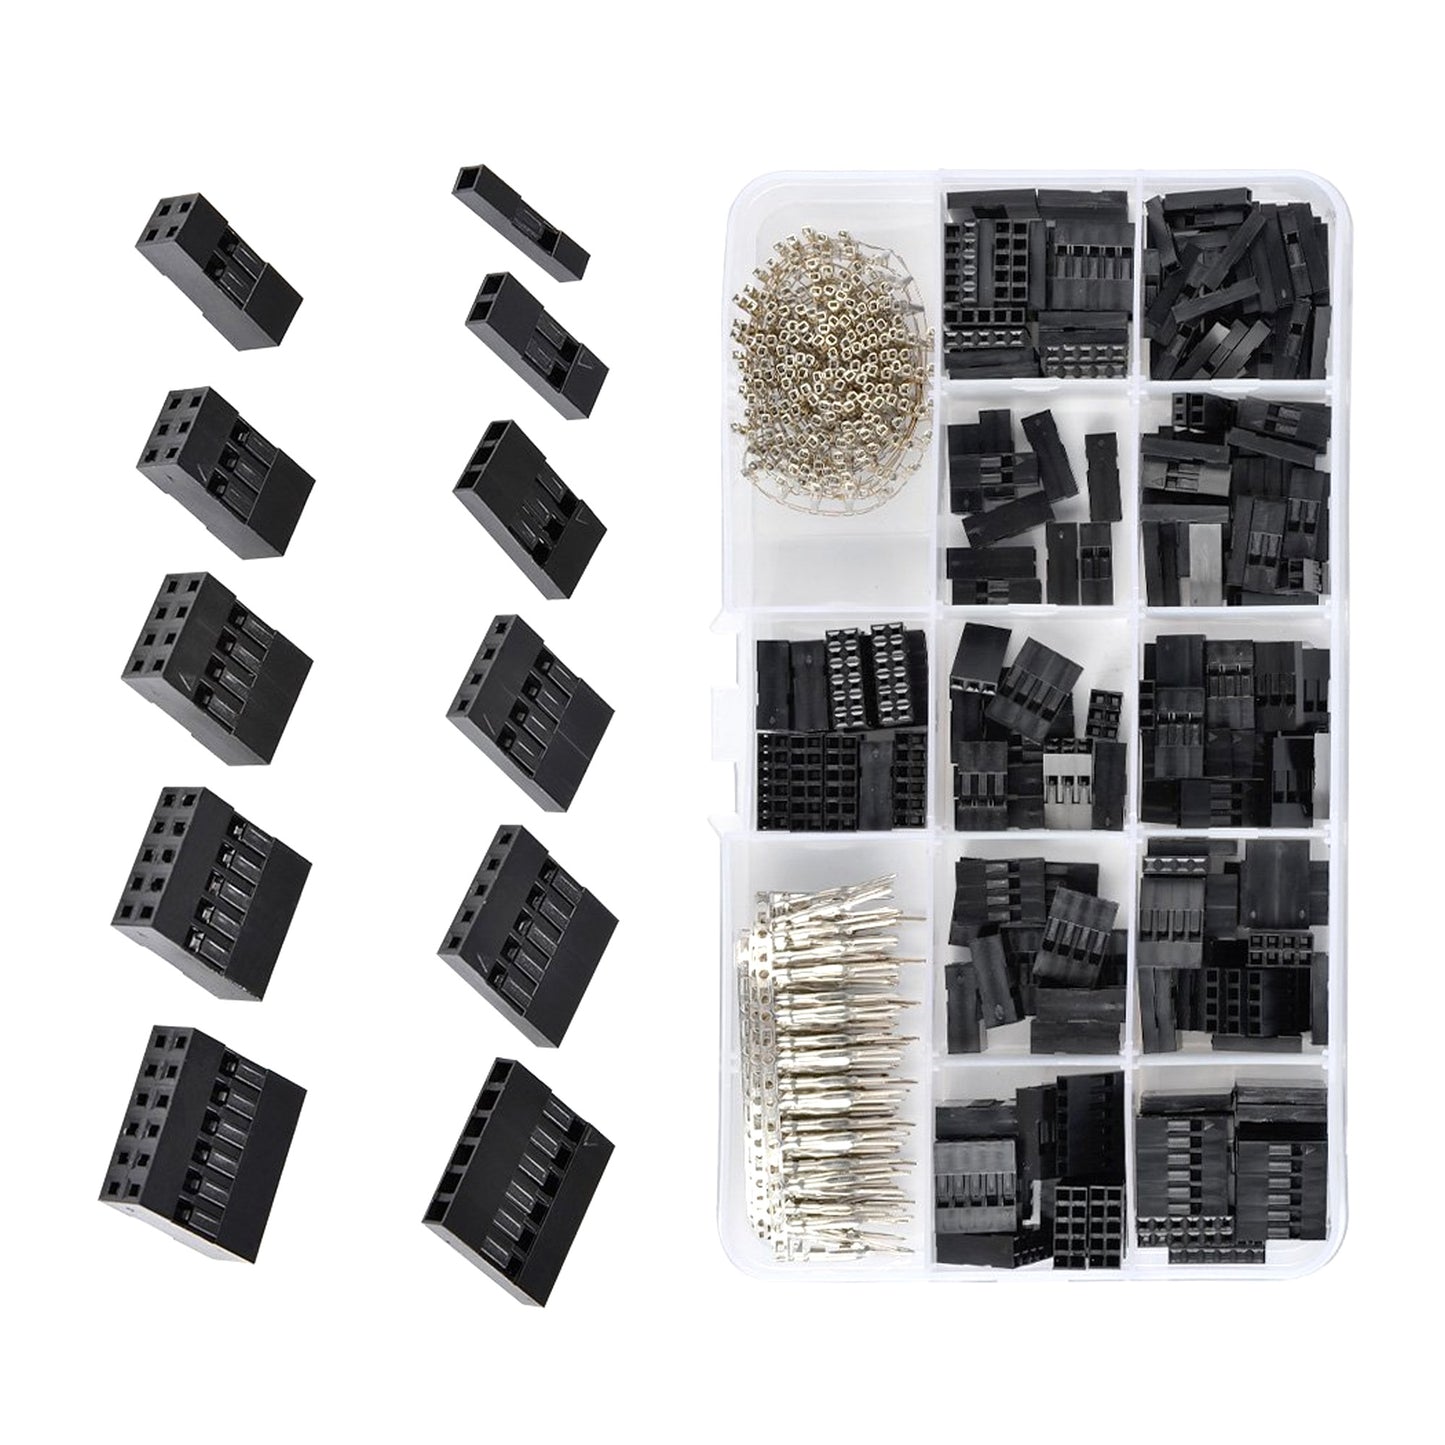 620Pcs 2.54mm Housing Connector Dupont Connector Male Female Crimp Pins Adaptor Assortment JST Connector Kit - RS1136 - REES52